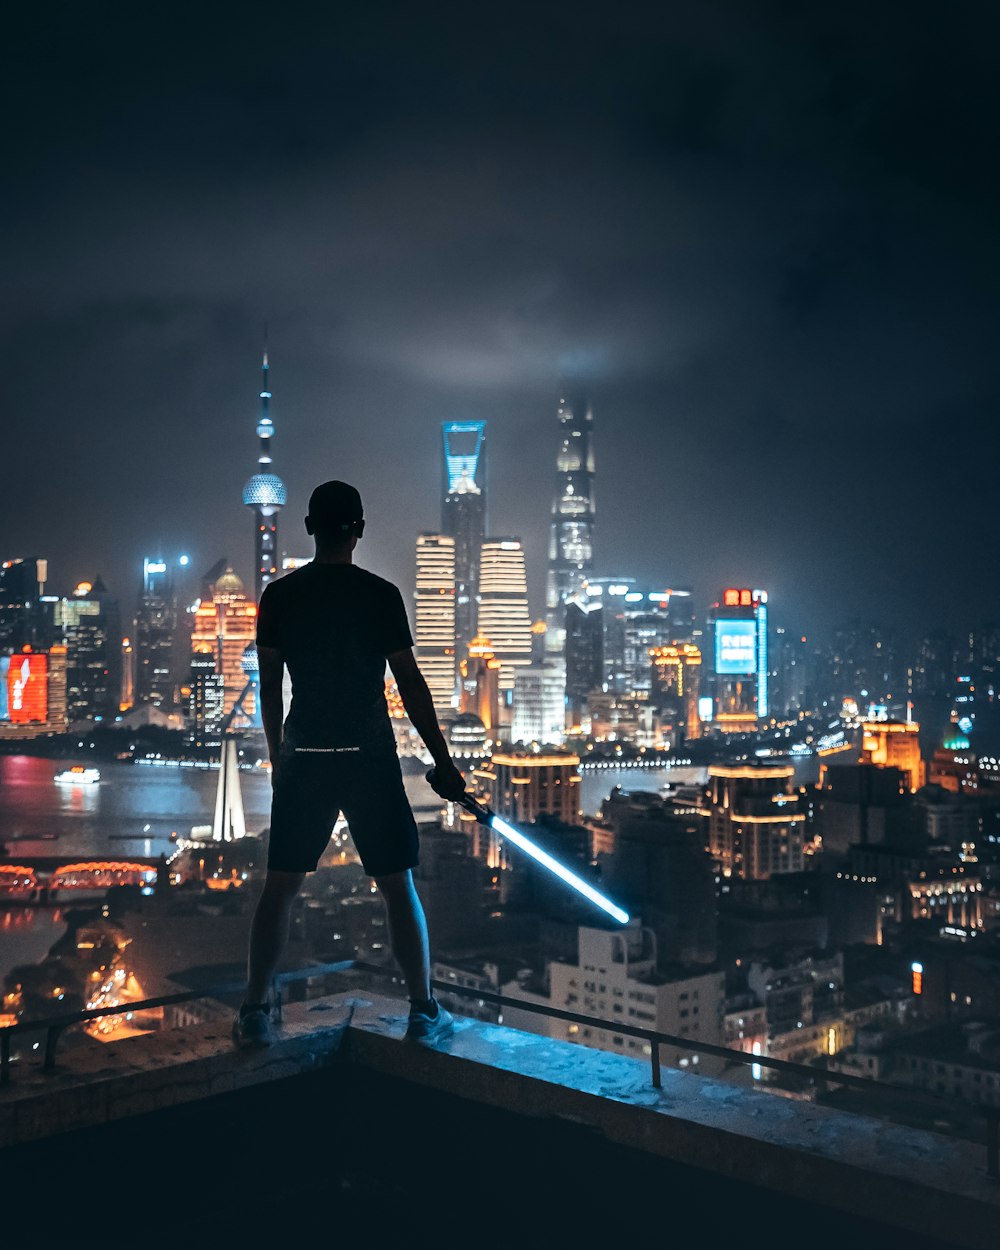 man holding lightsaber while standing on ledge overlooking city